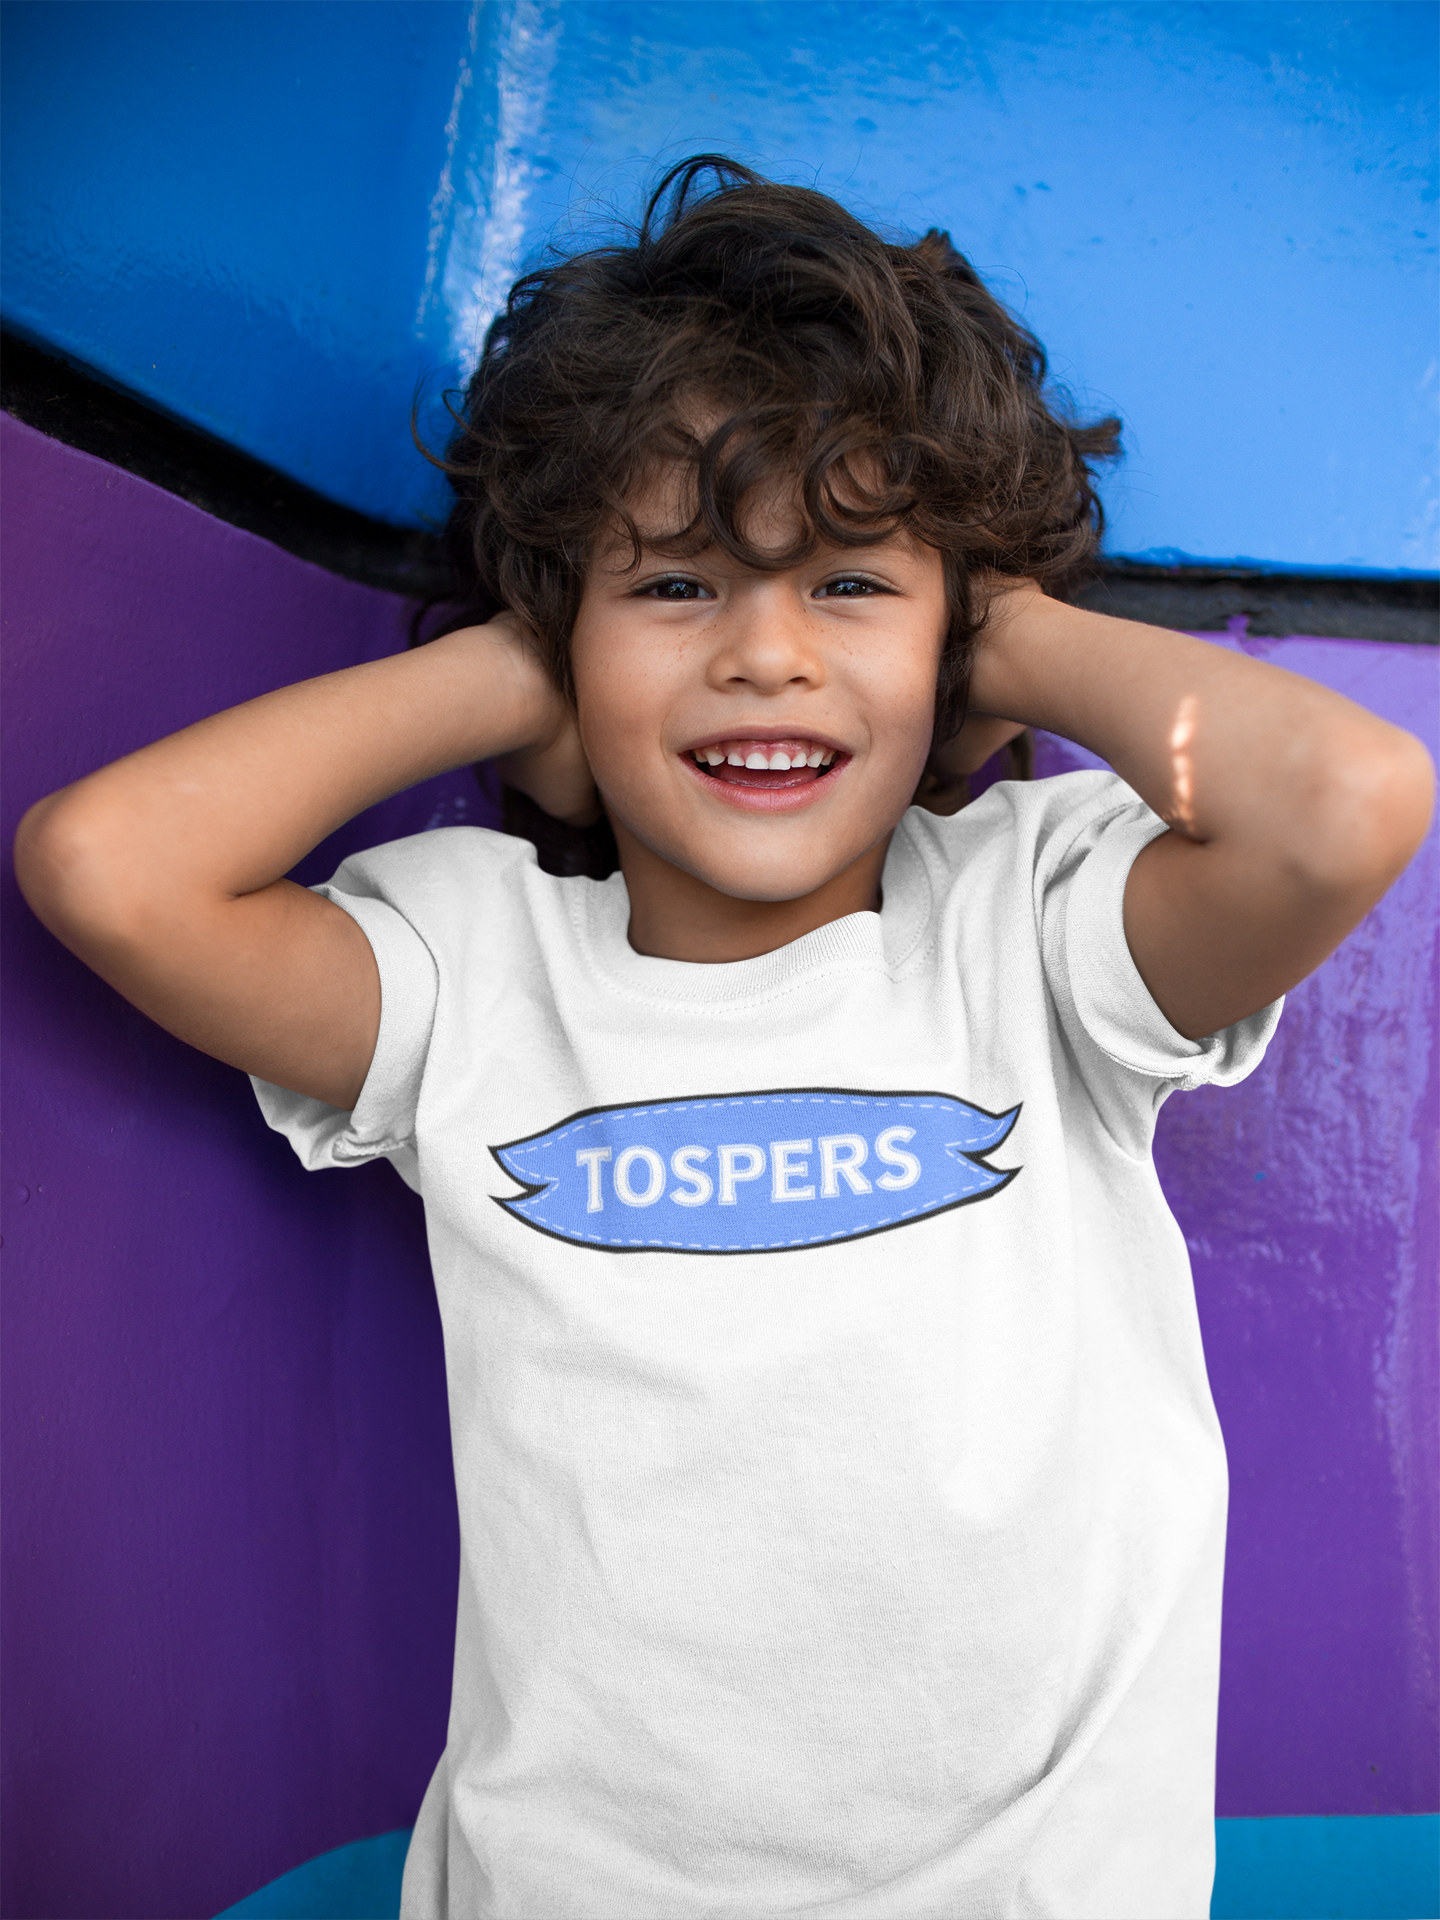 Tospers Logo Youth Short Sleeve Tee